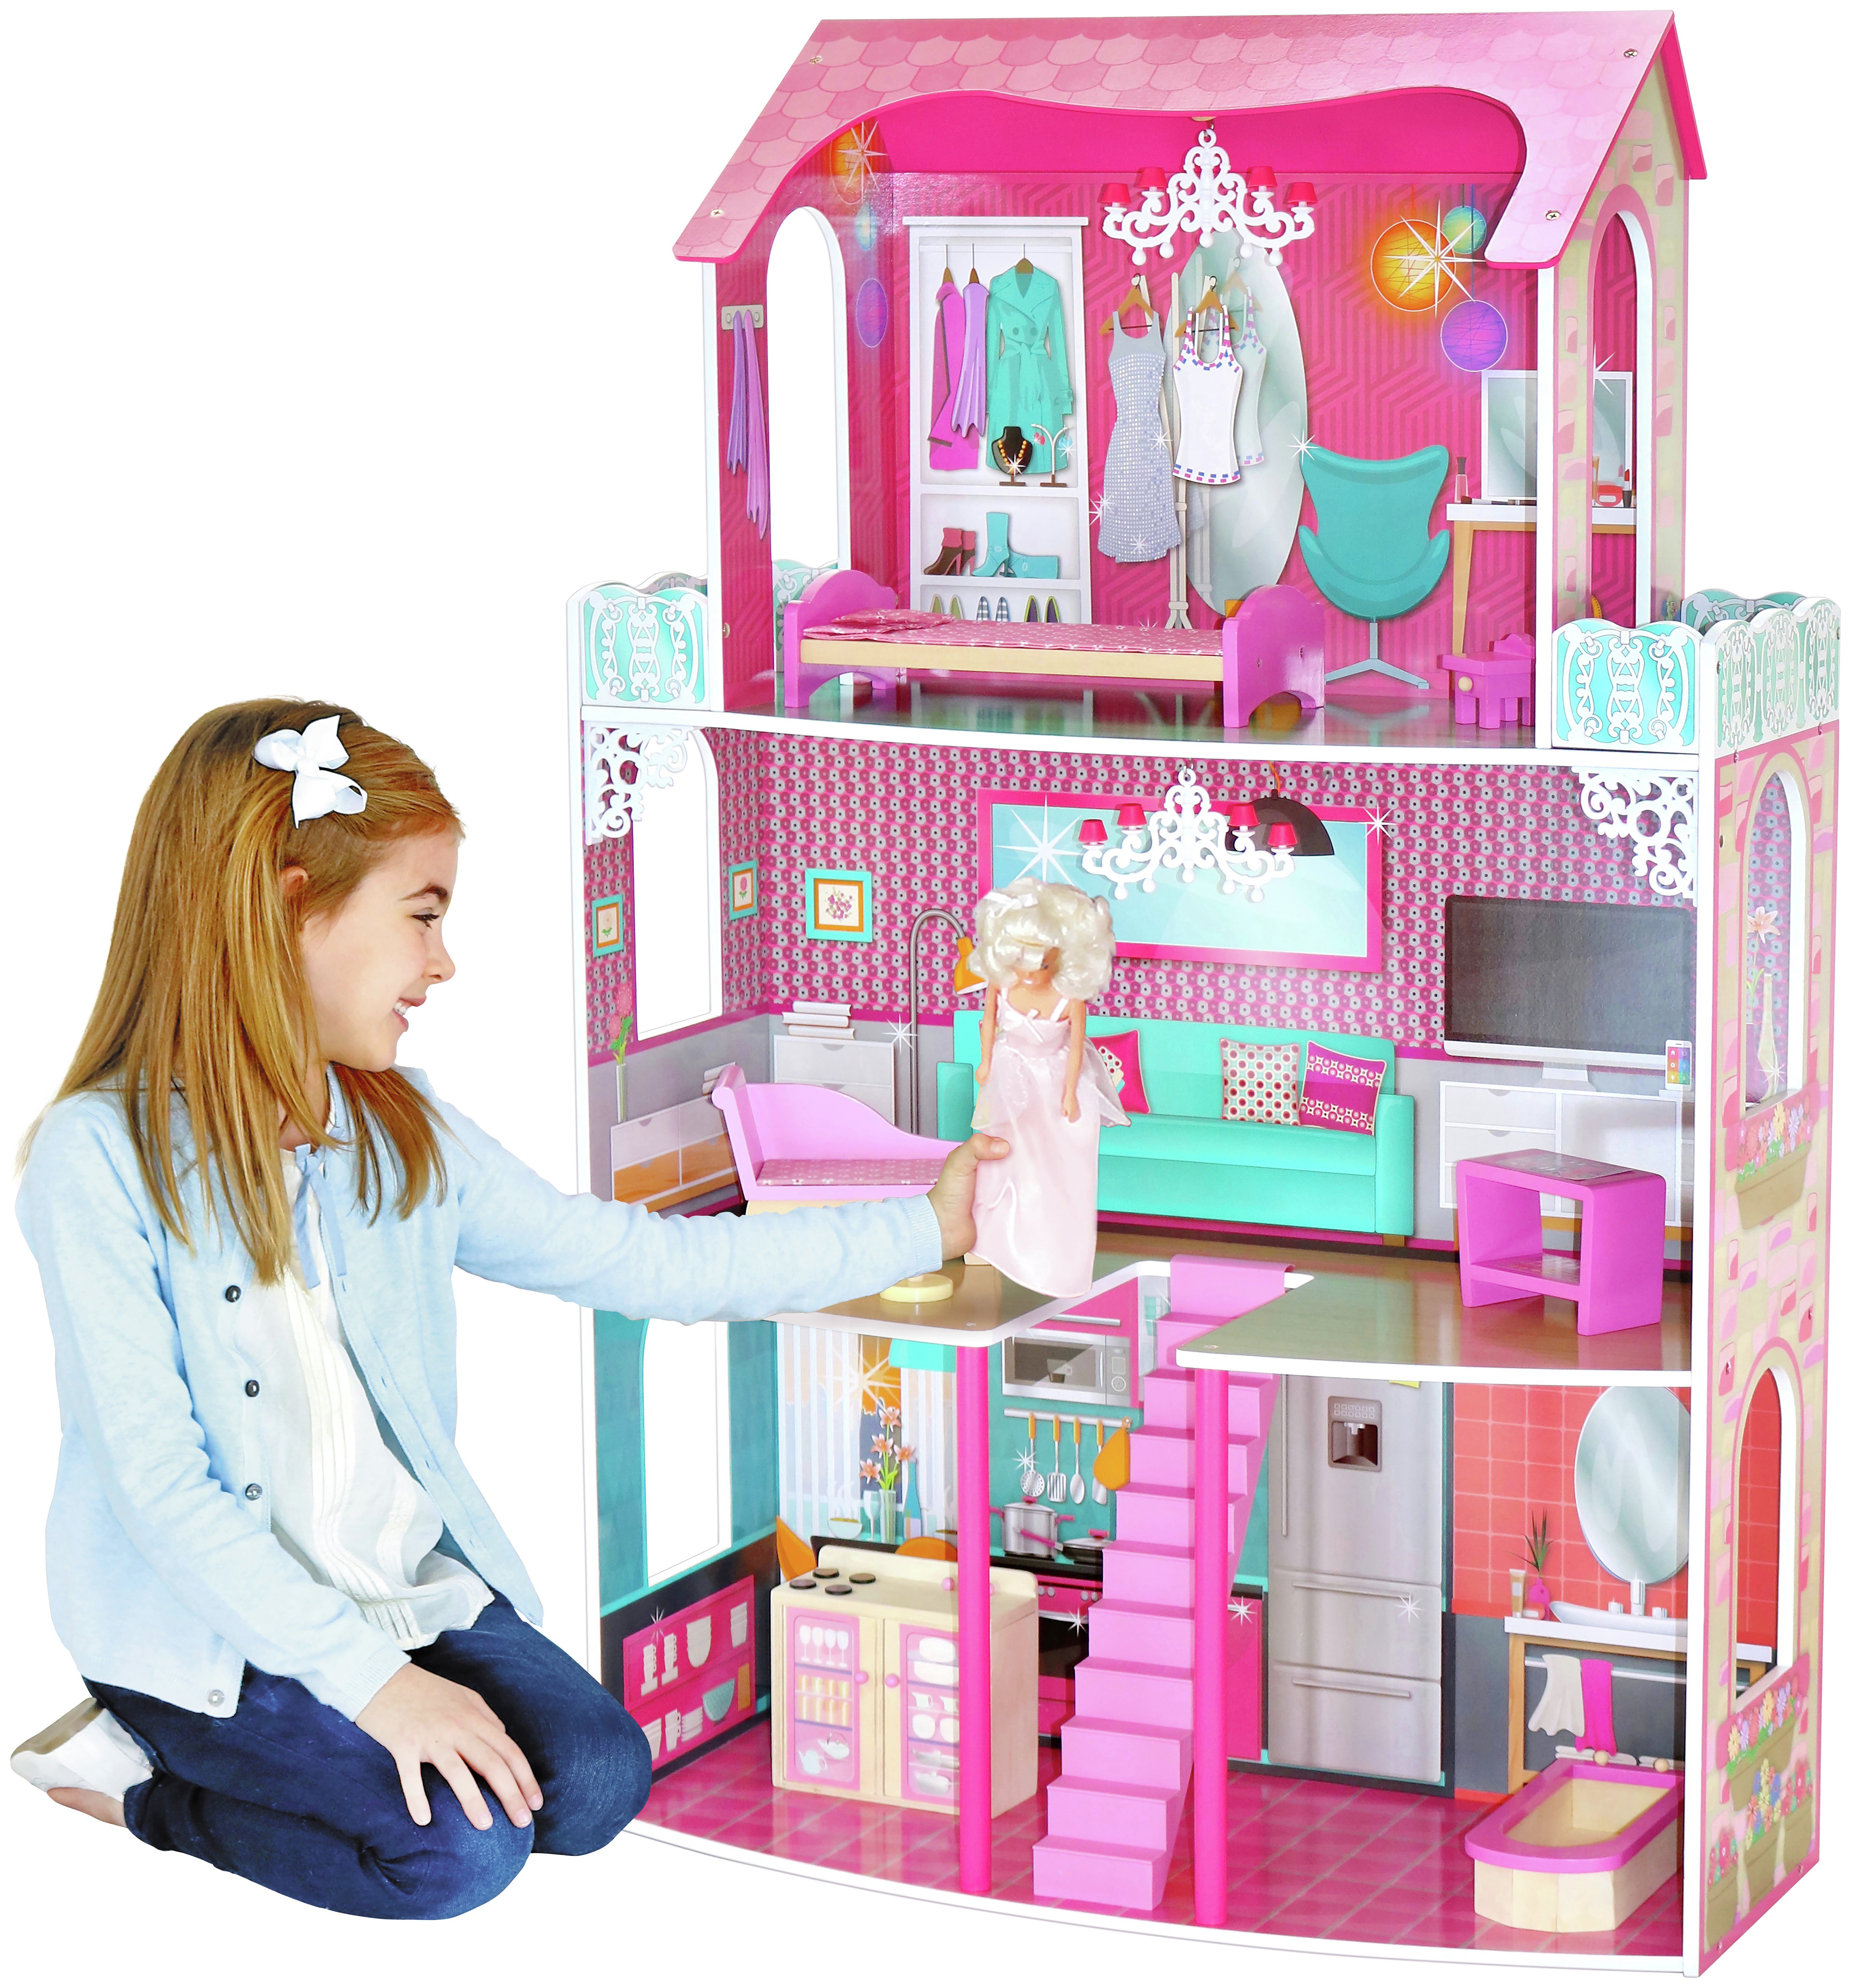 'Chad Valley 3 Storey Glamour Mansion Dolls House